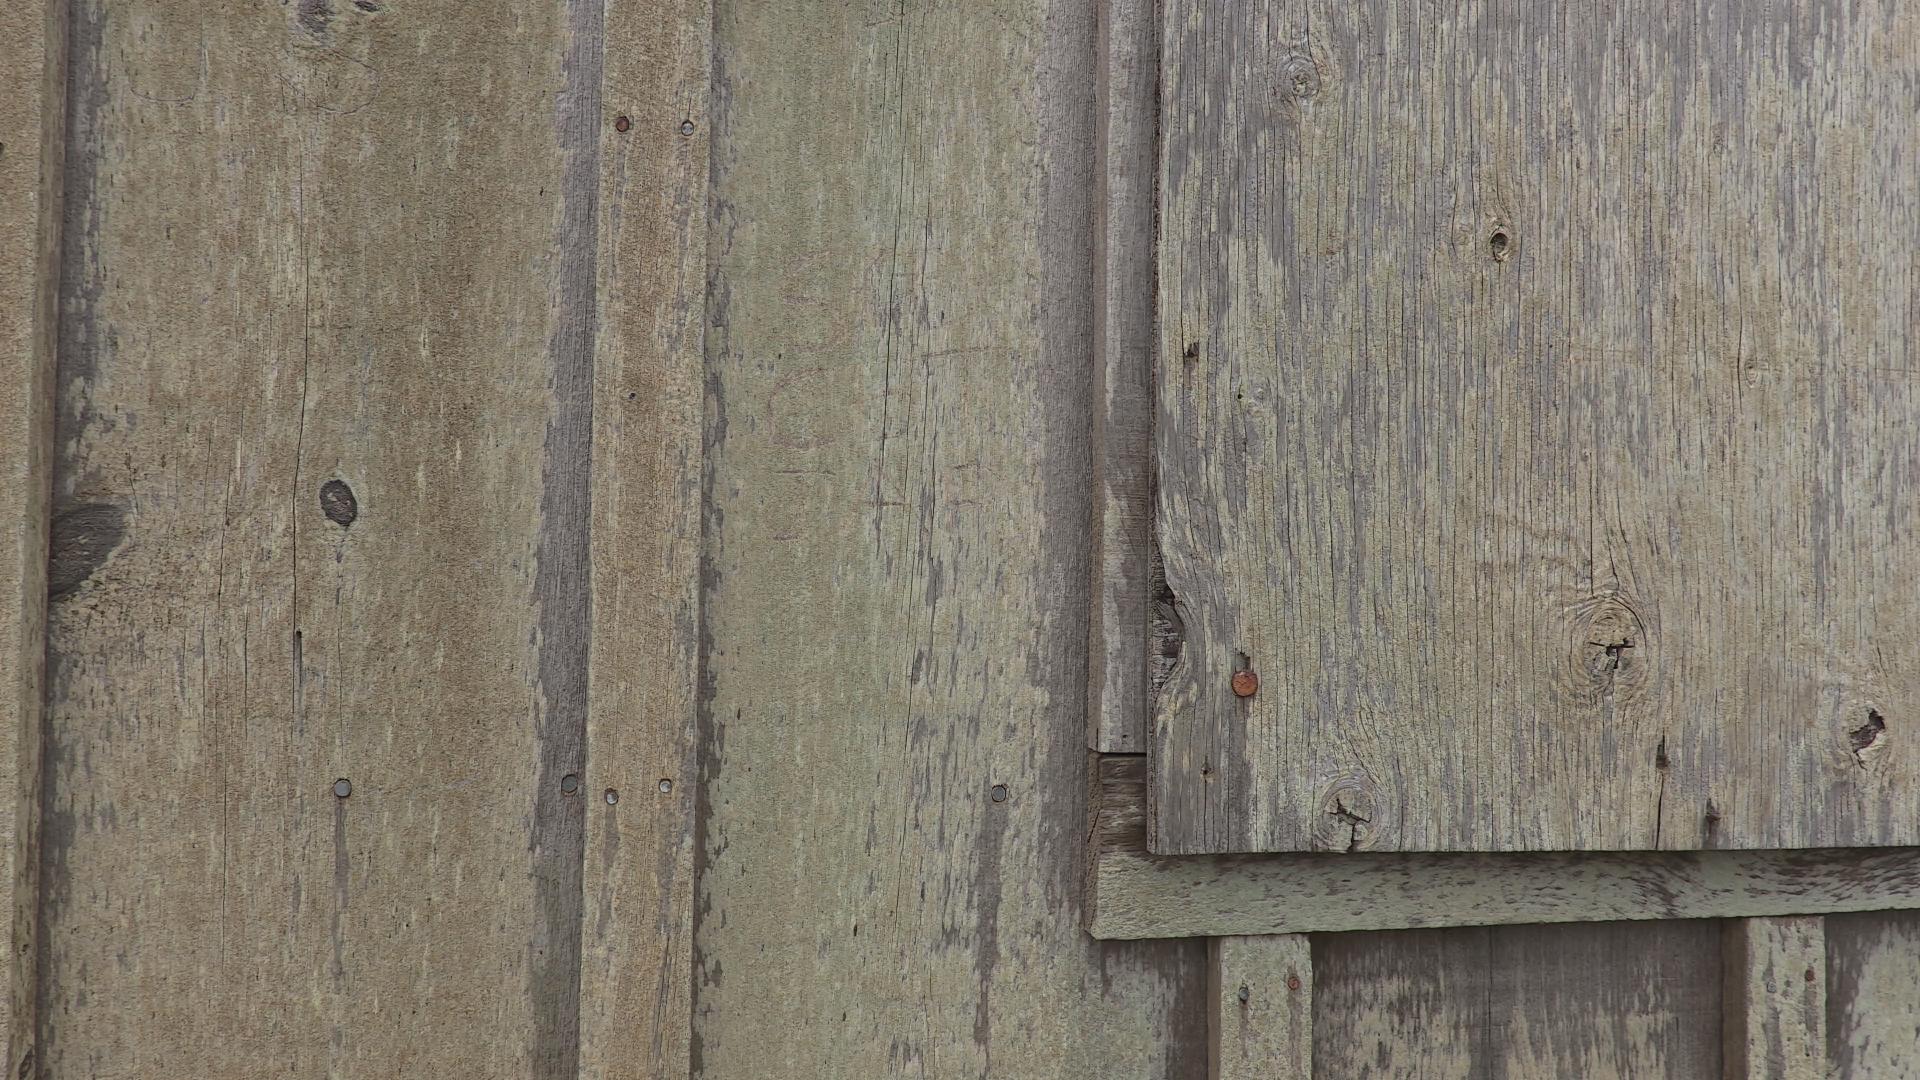 Wooden slats are shown close-up in a detail shot with weathered and rusty nails and fastners.